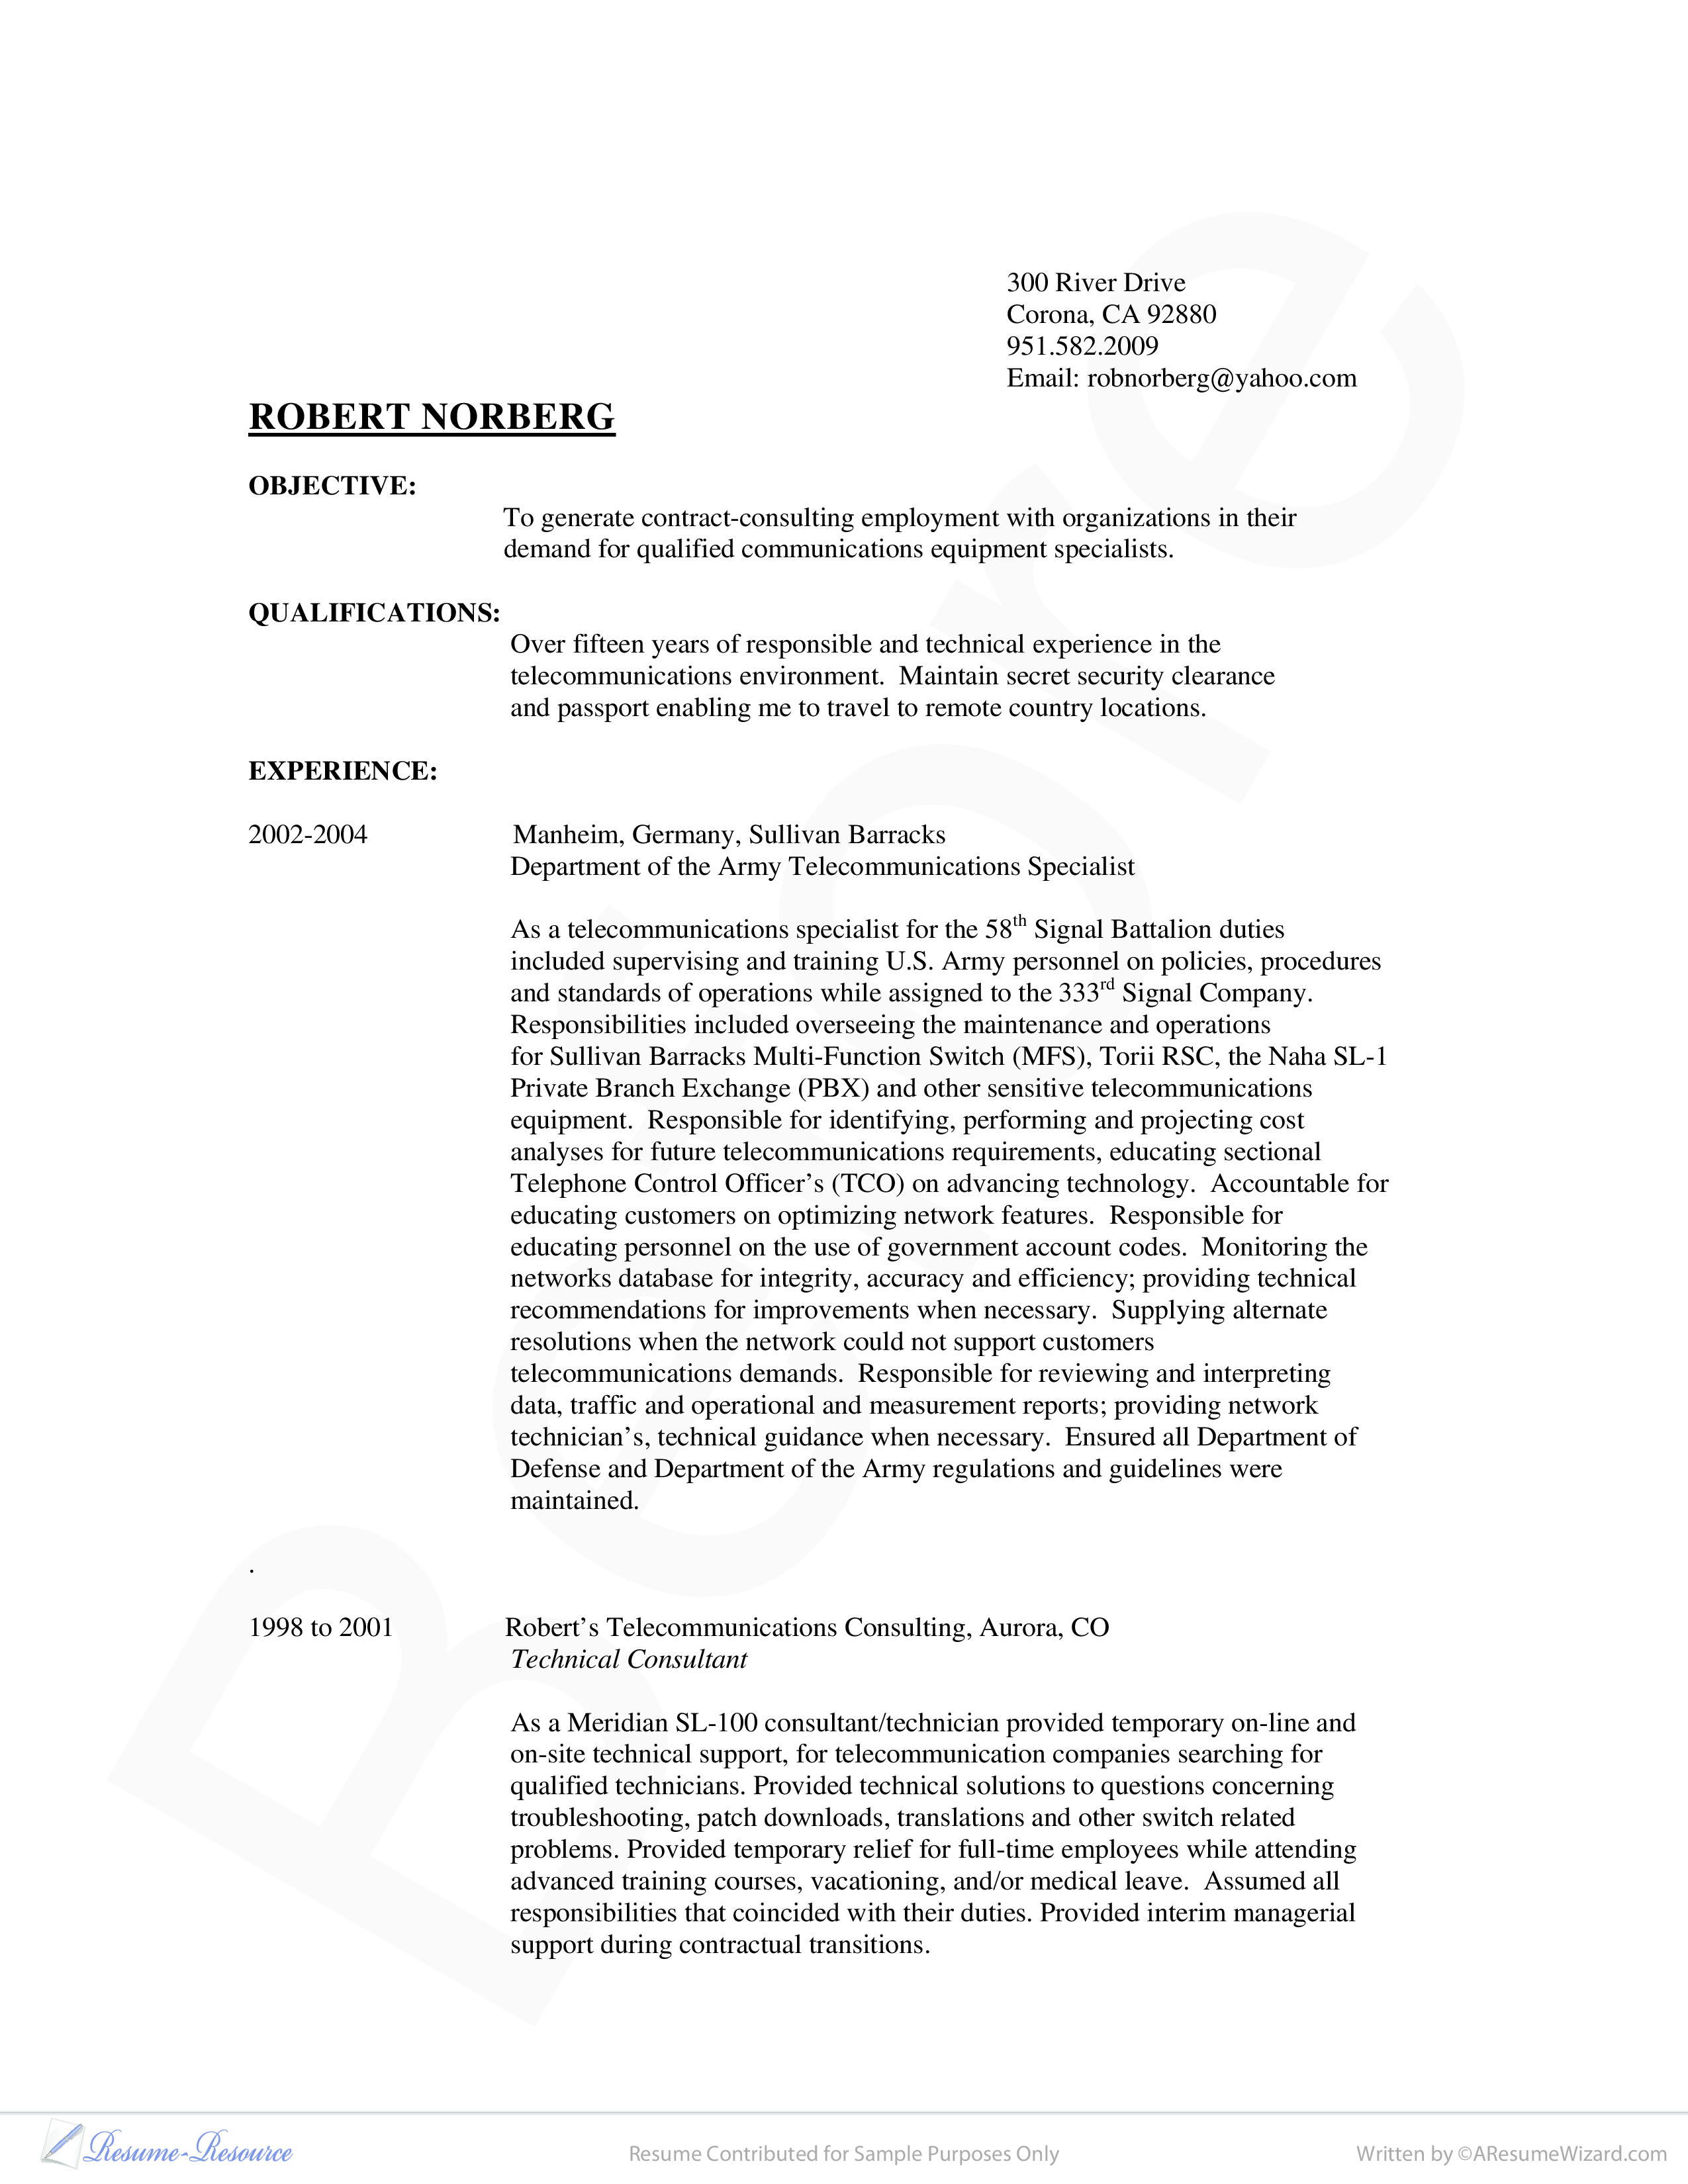 telecommunications specialist resume template